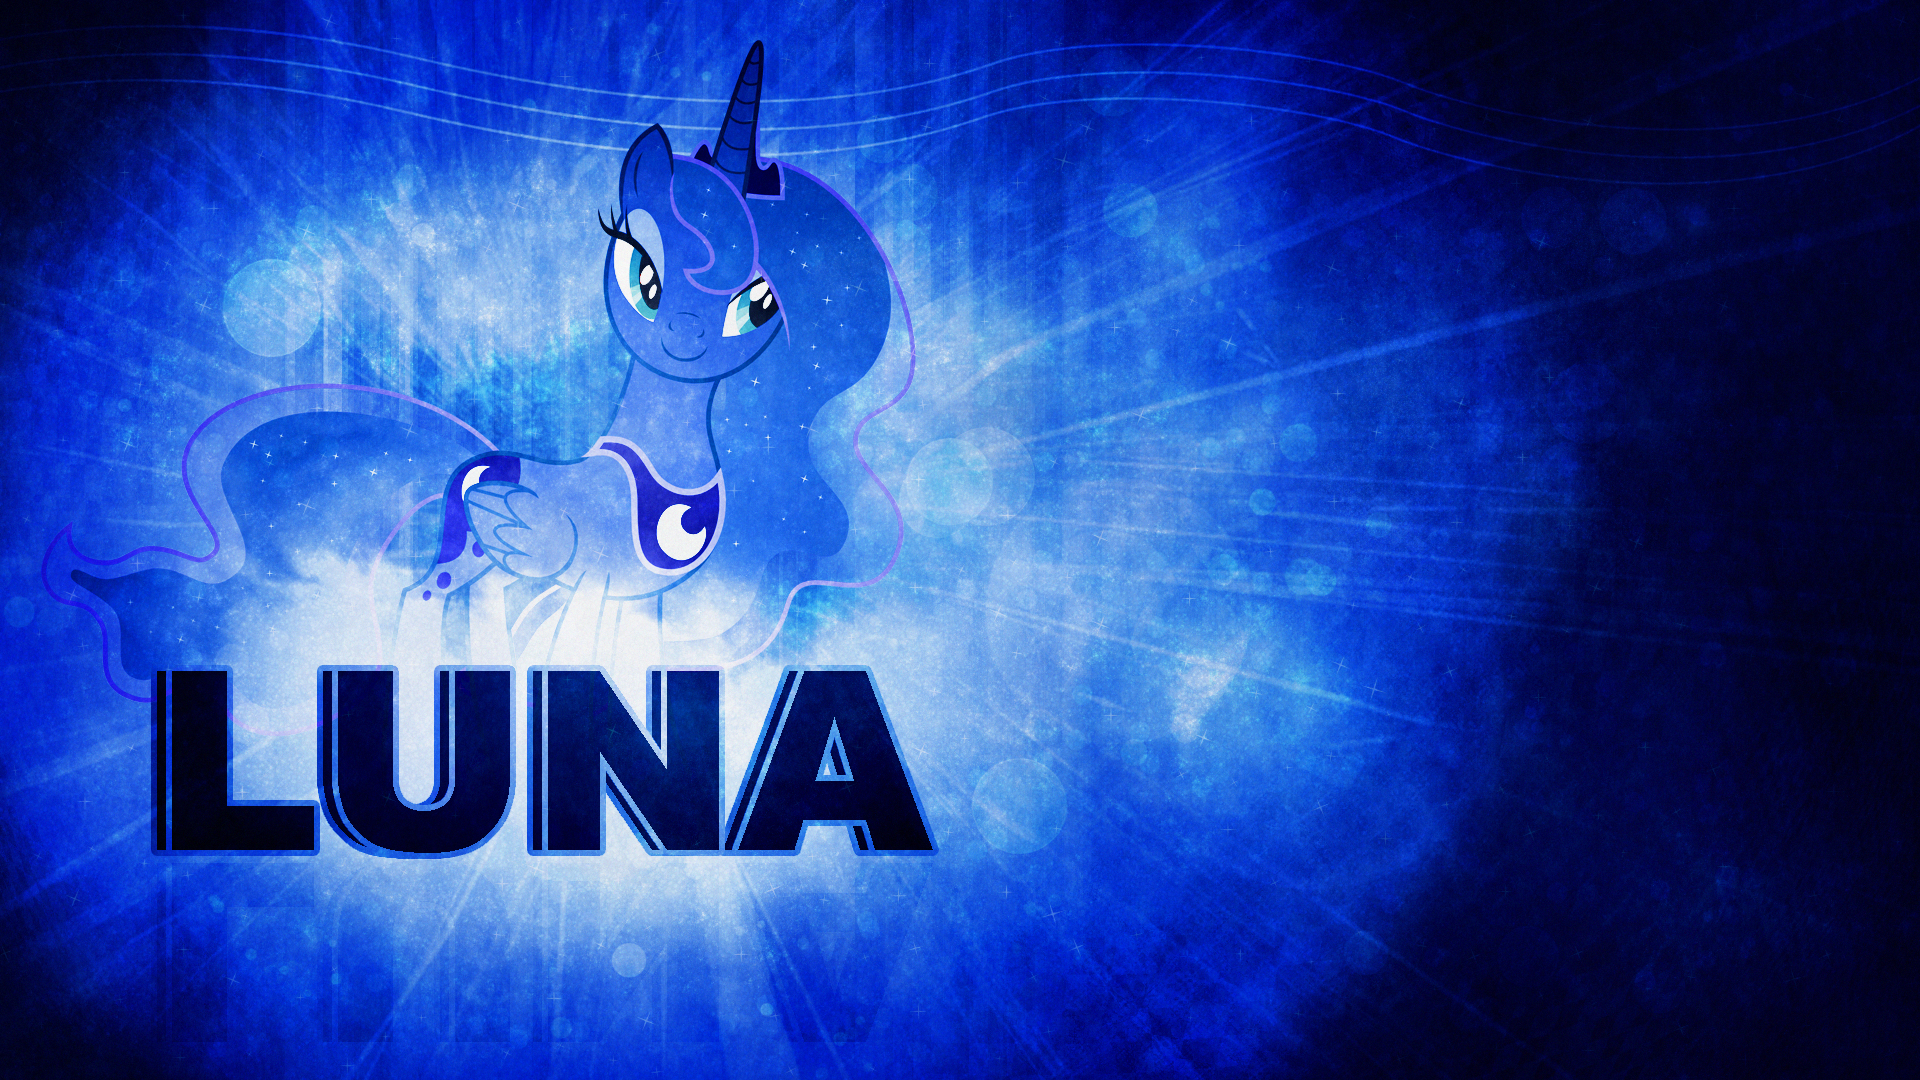 Wallpaper - Luna by Mackaged and RelaxingOnTheMoon